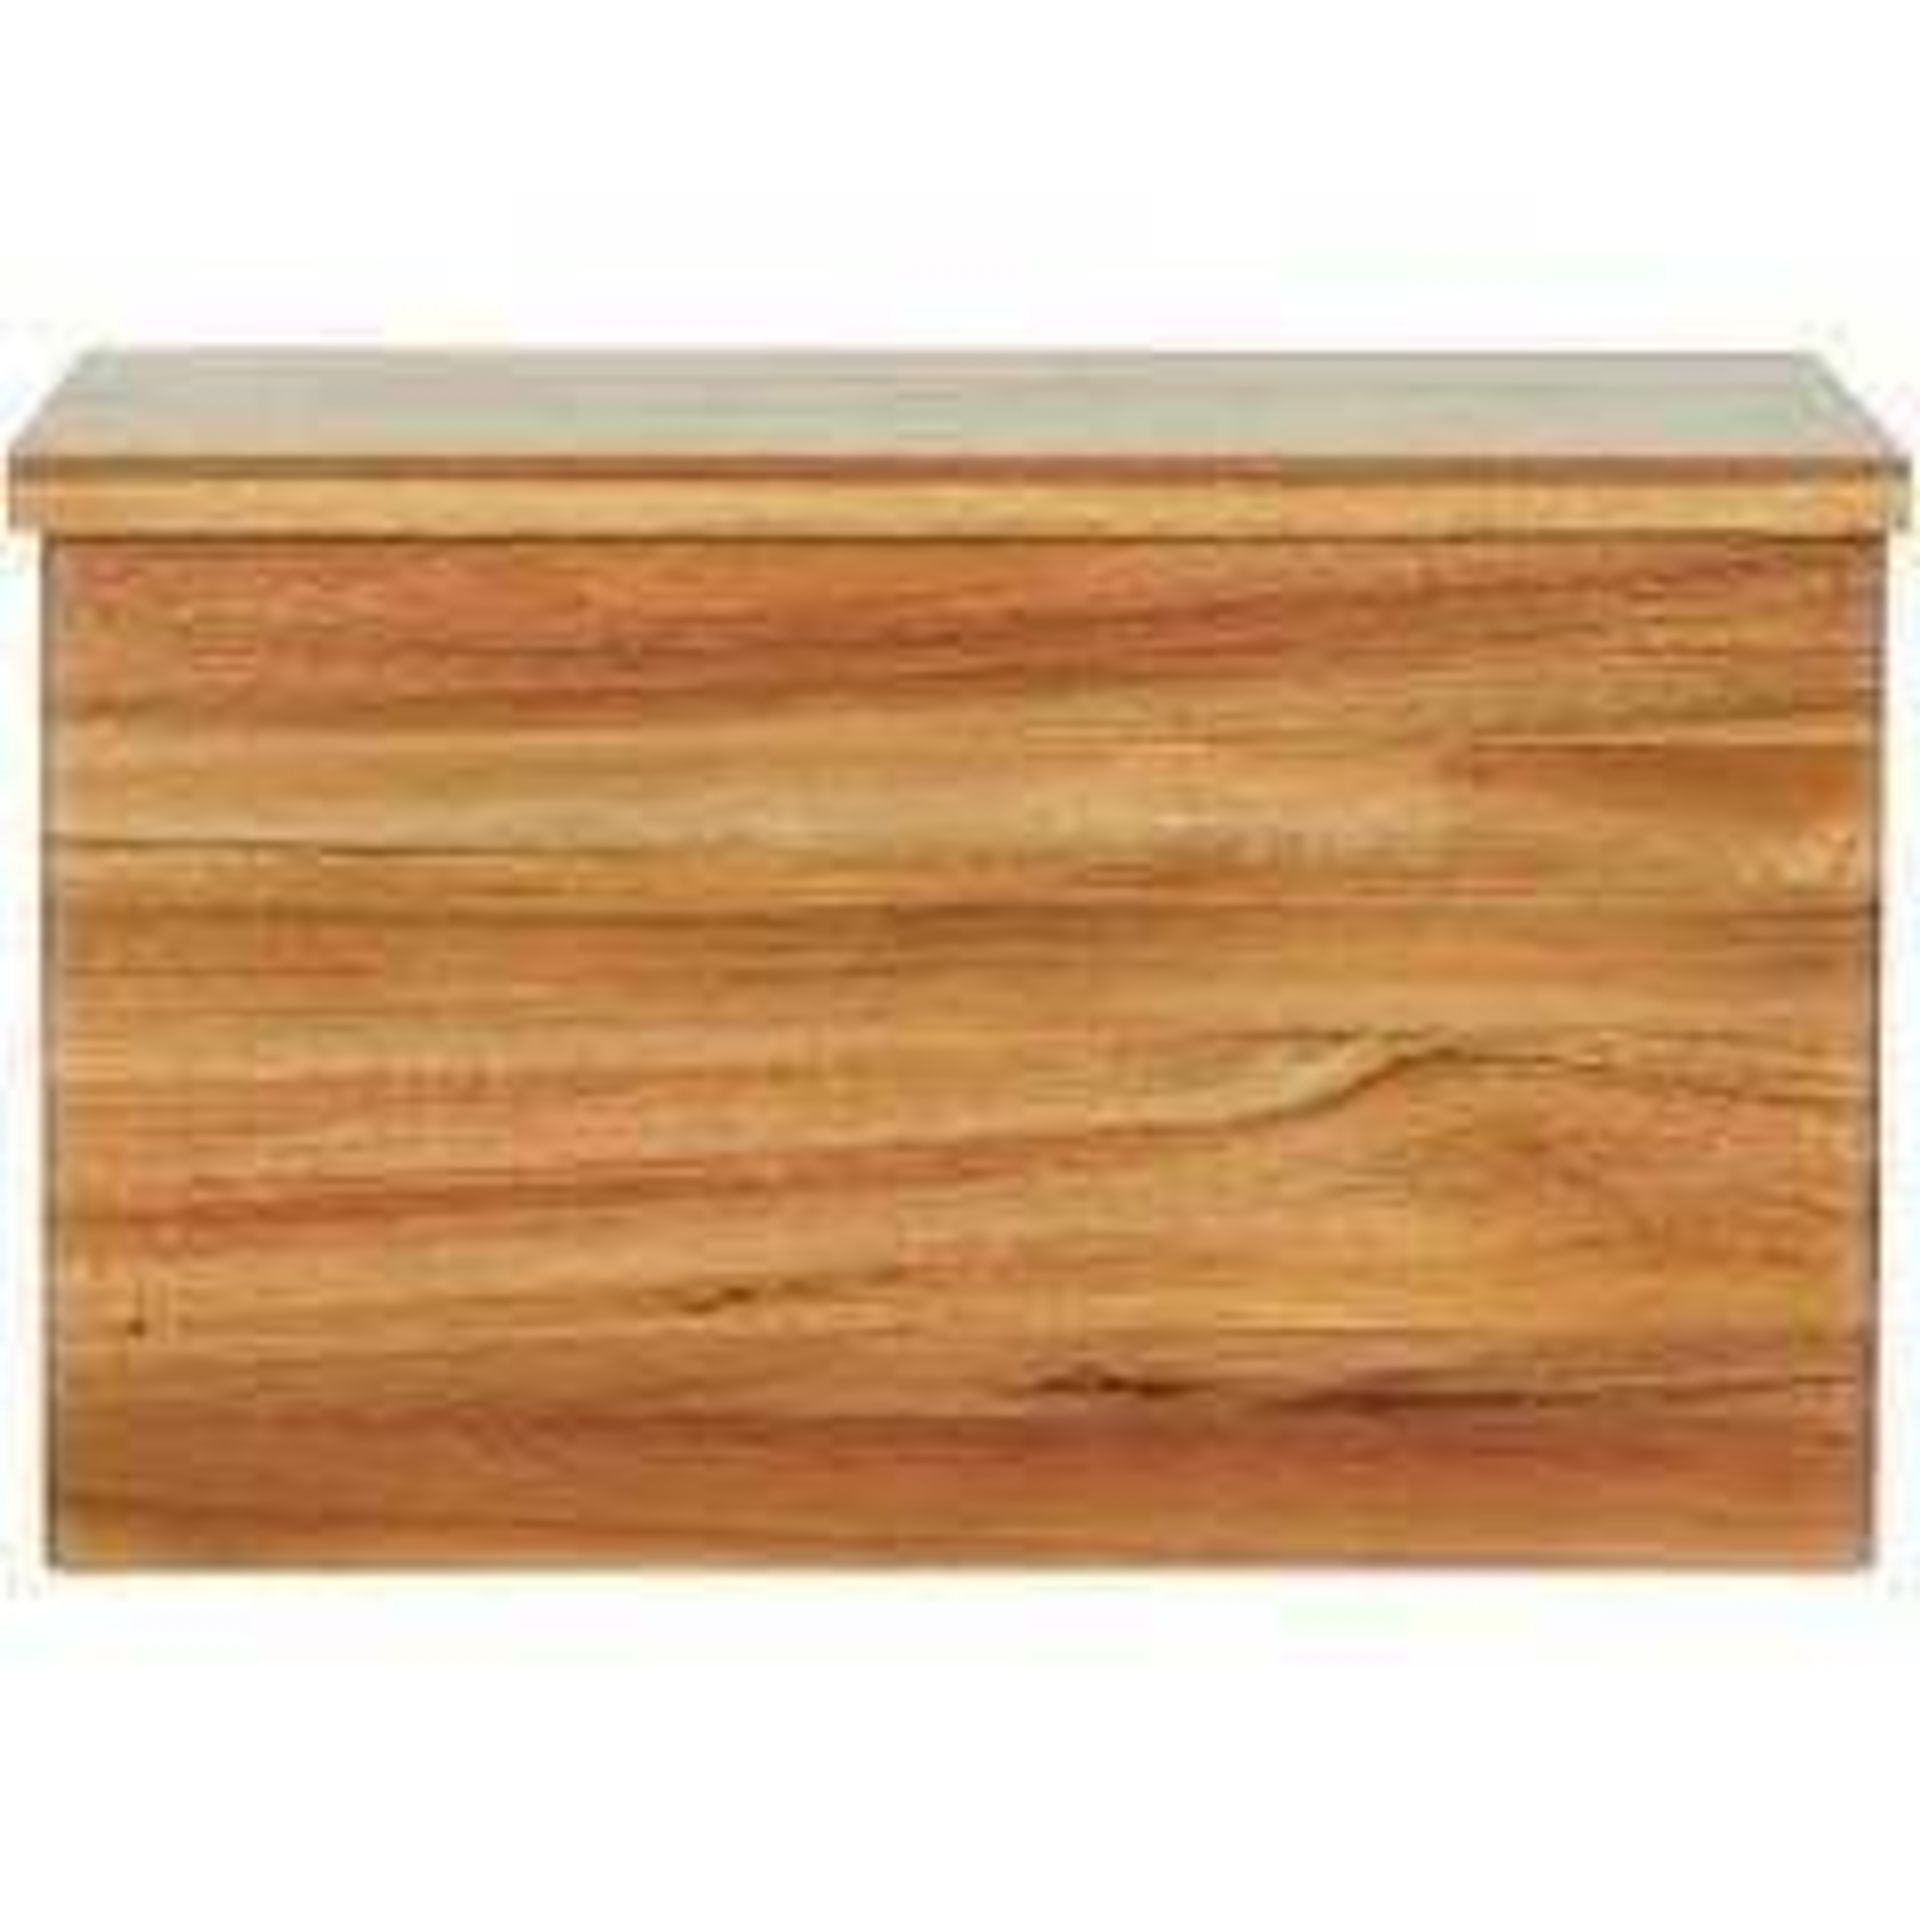 RRP £100 Lot To Contain 2 Wooden Oak Bread Bins (Ret00810405) (Appraisals Available On Request) (